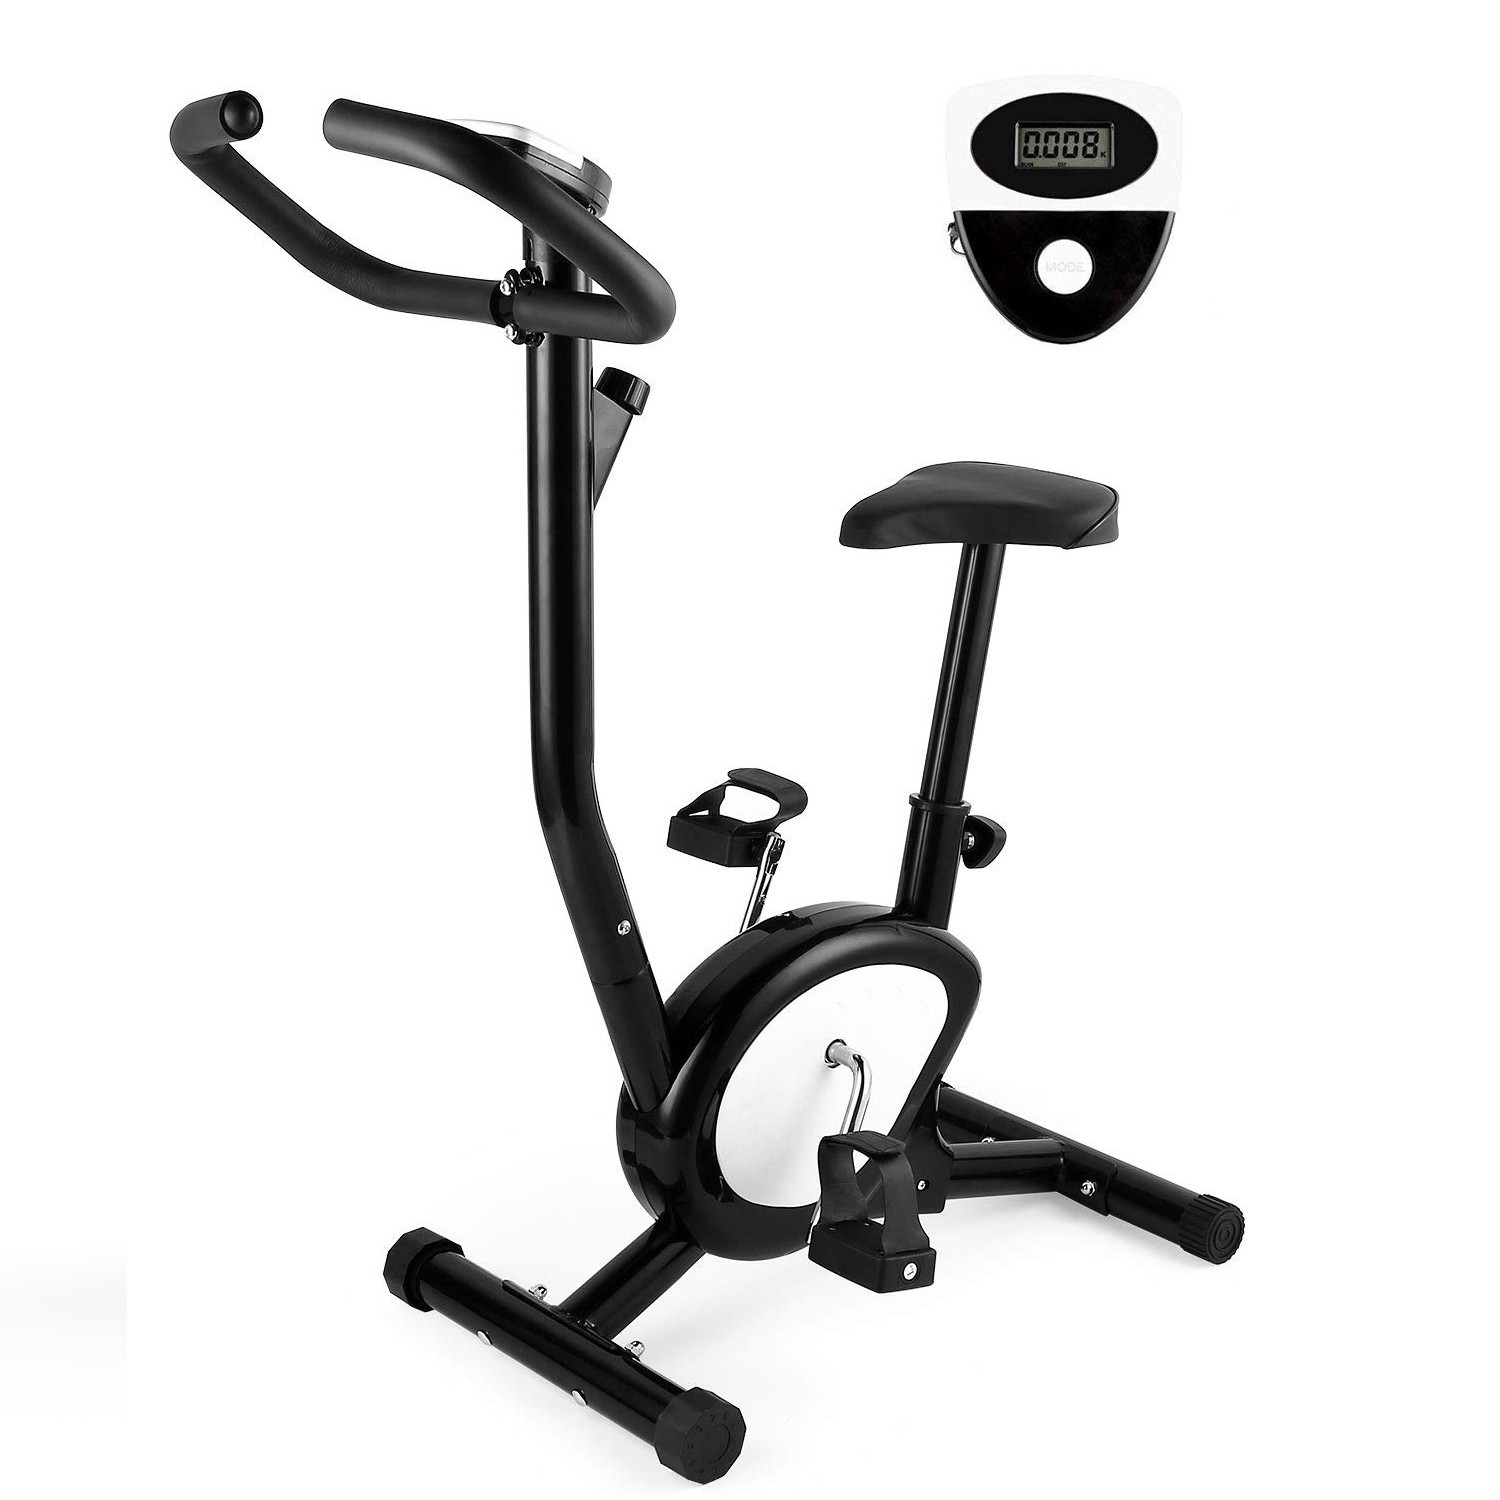 Navy Permanently Commercial Aparate Fitness Cardio | Biciclop.eu